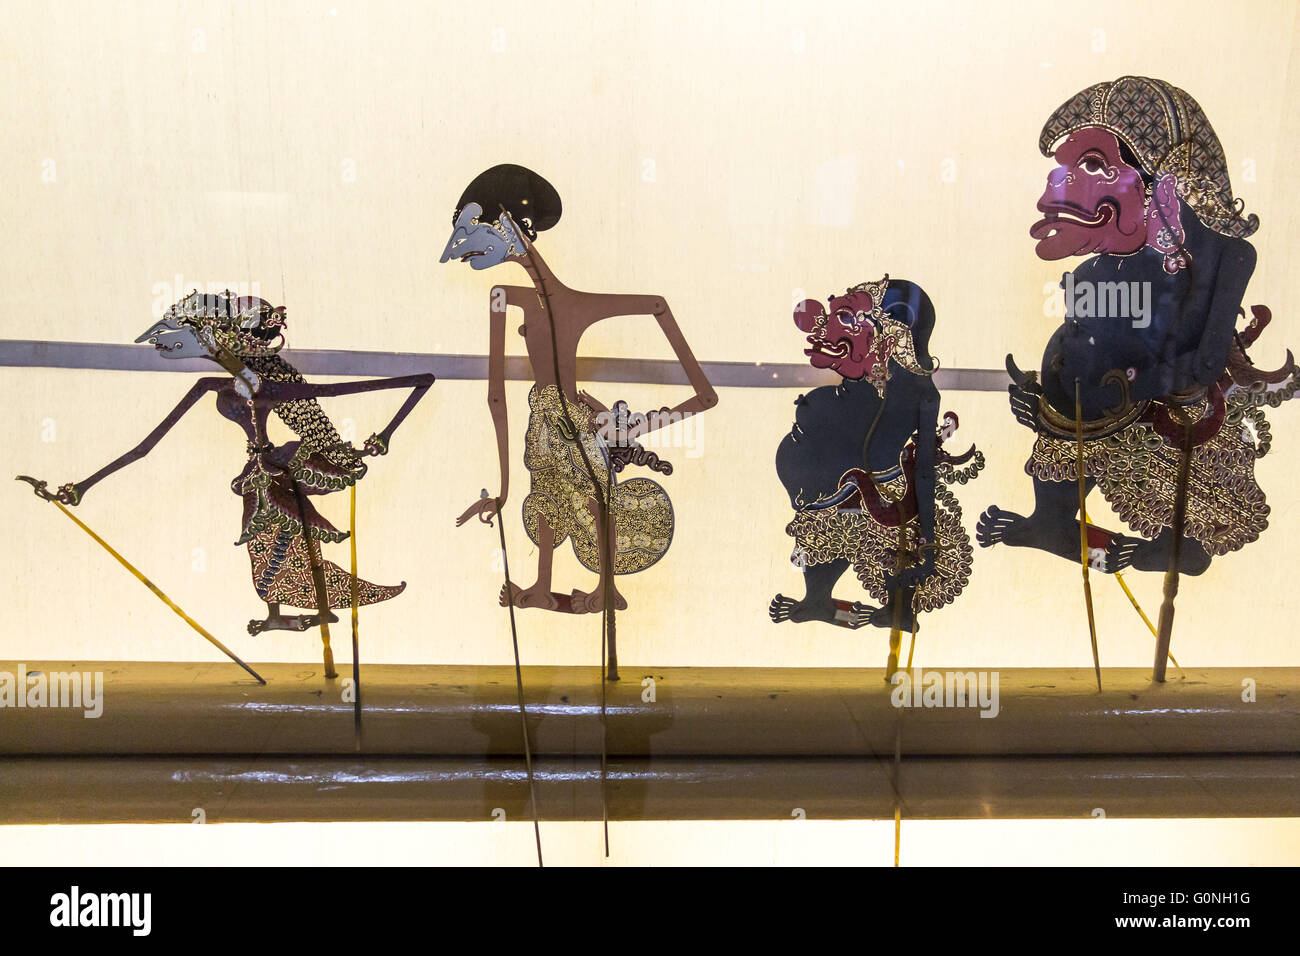 Puppets for indonesian puppet show Stock Photo